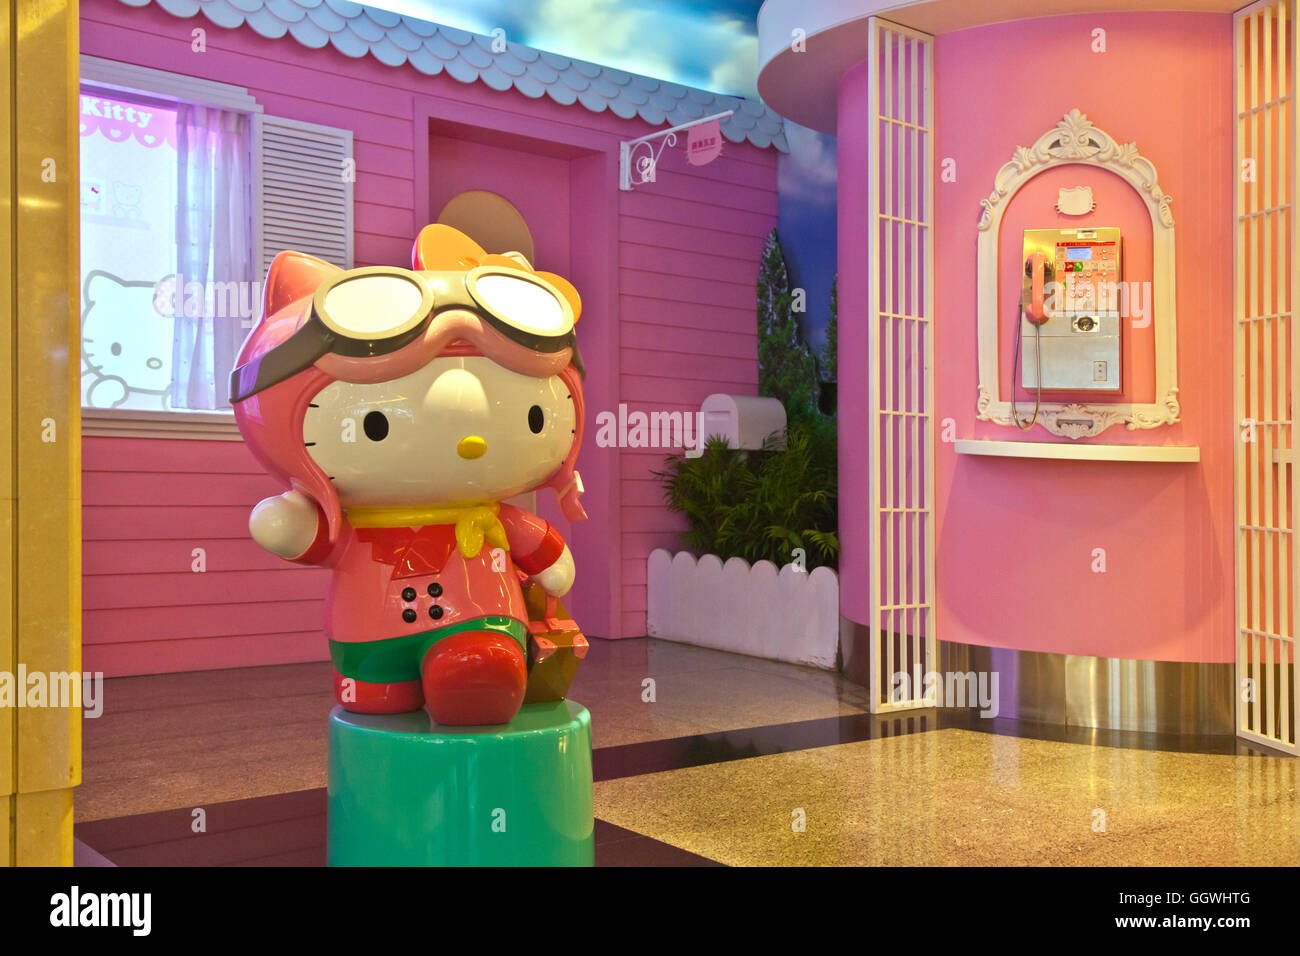 HELLO KITTY booth in the SINGAPORE AIRPORT Stock Photo